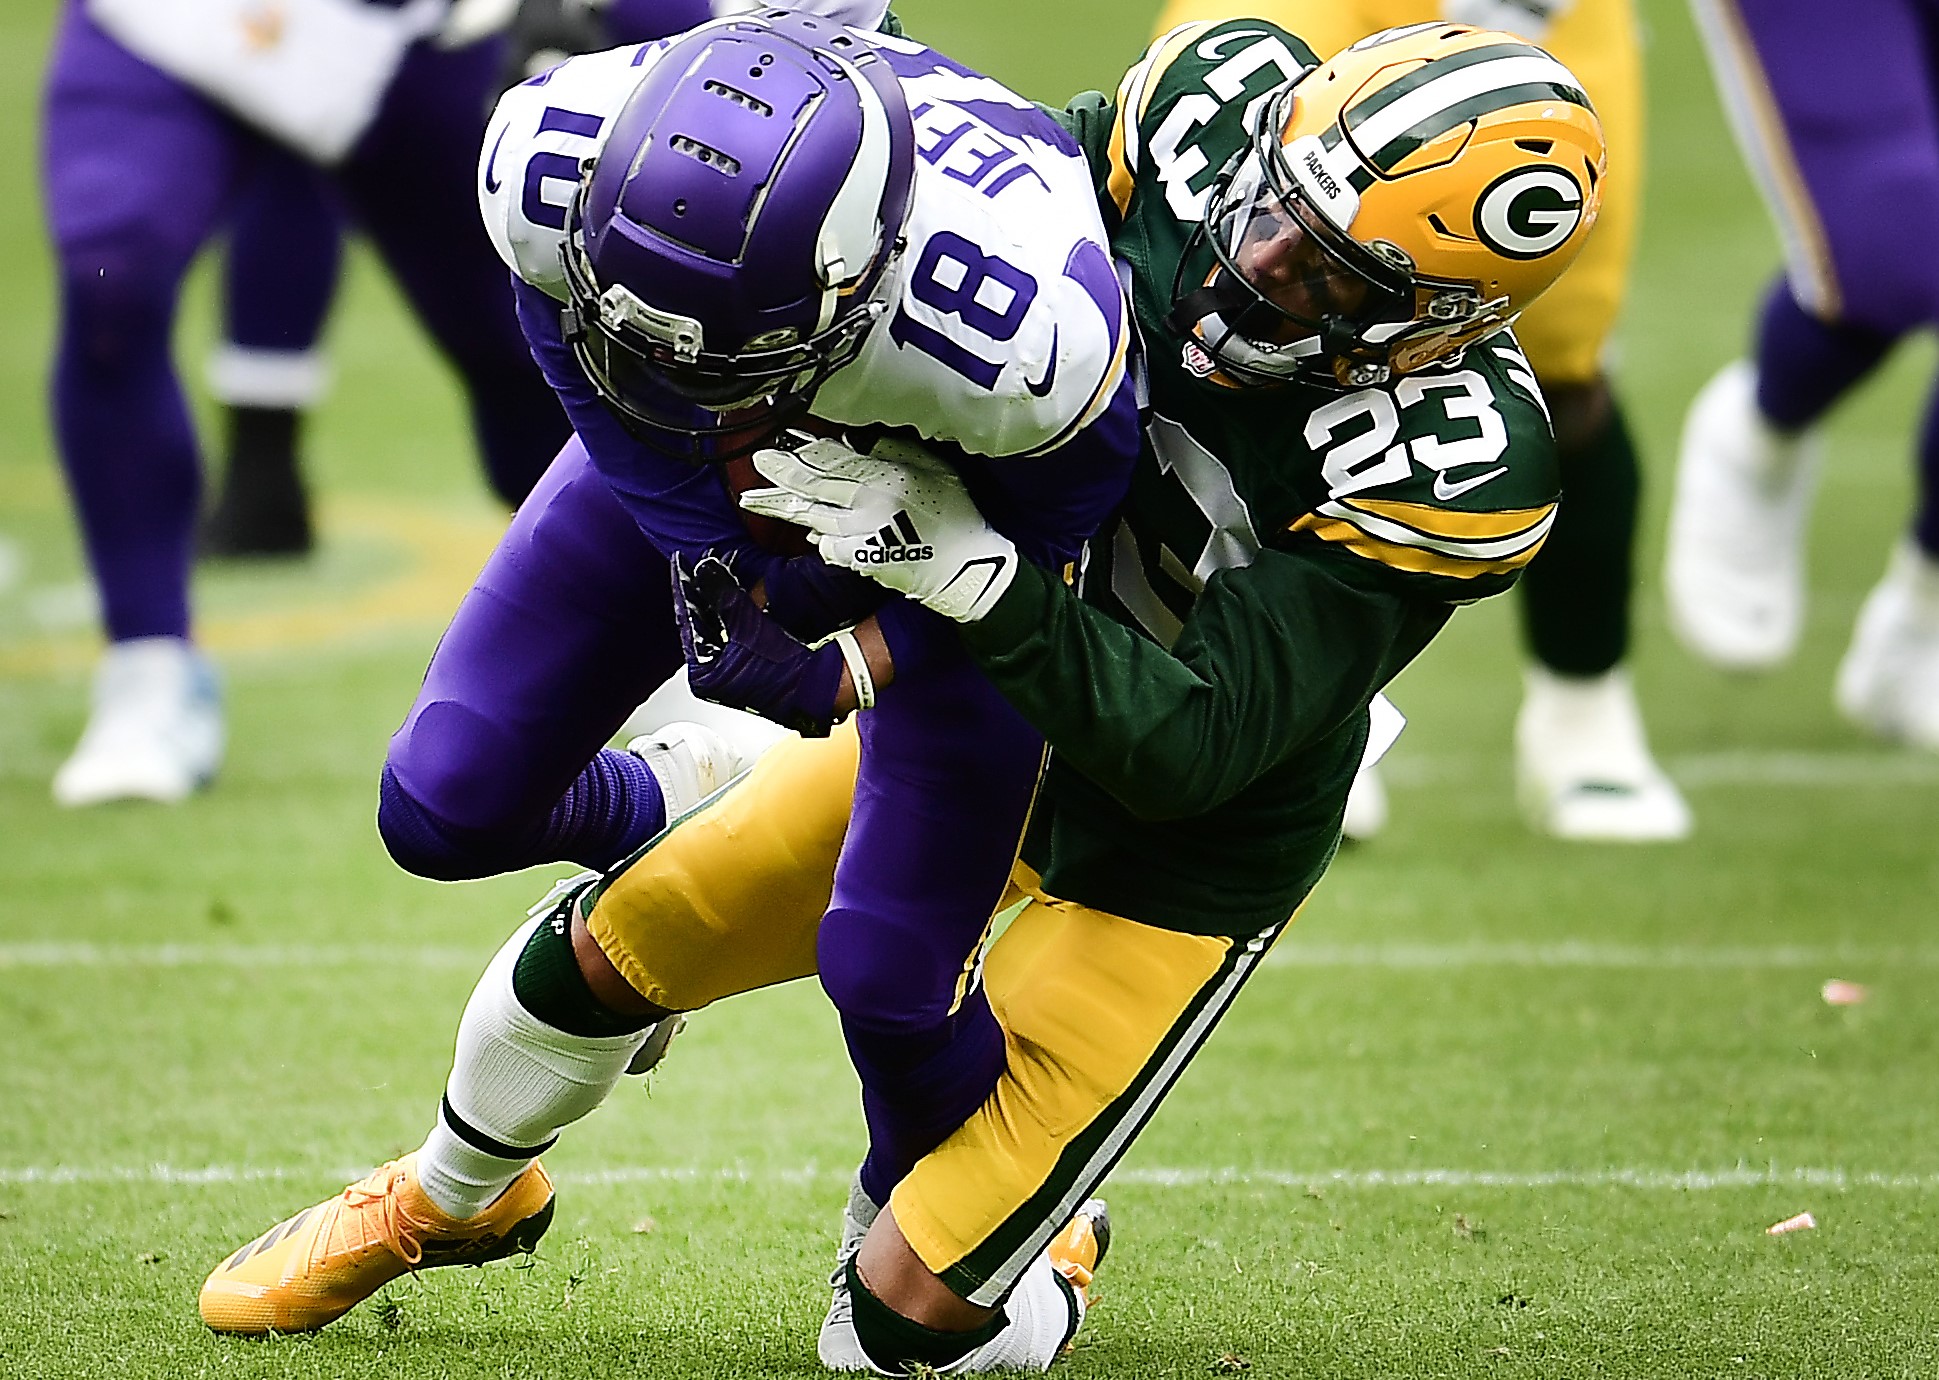 Justin Jefferson of the Minnesota Vikings runs as Jaire Alexander of the Green Bay Packers defends.